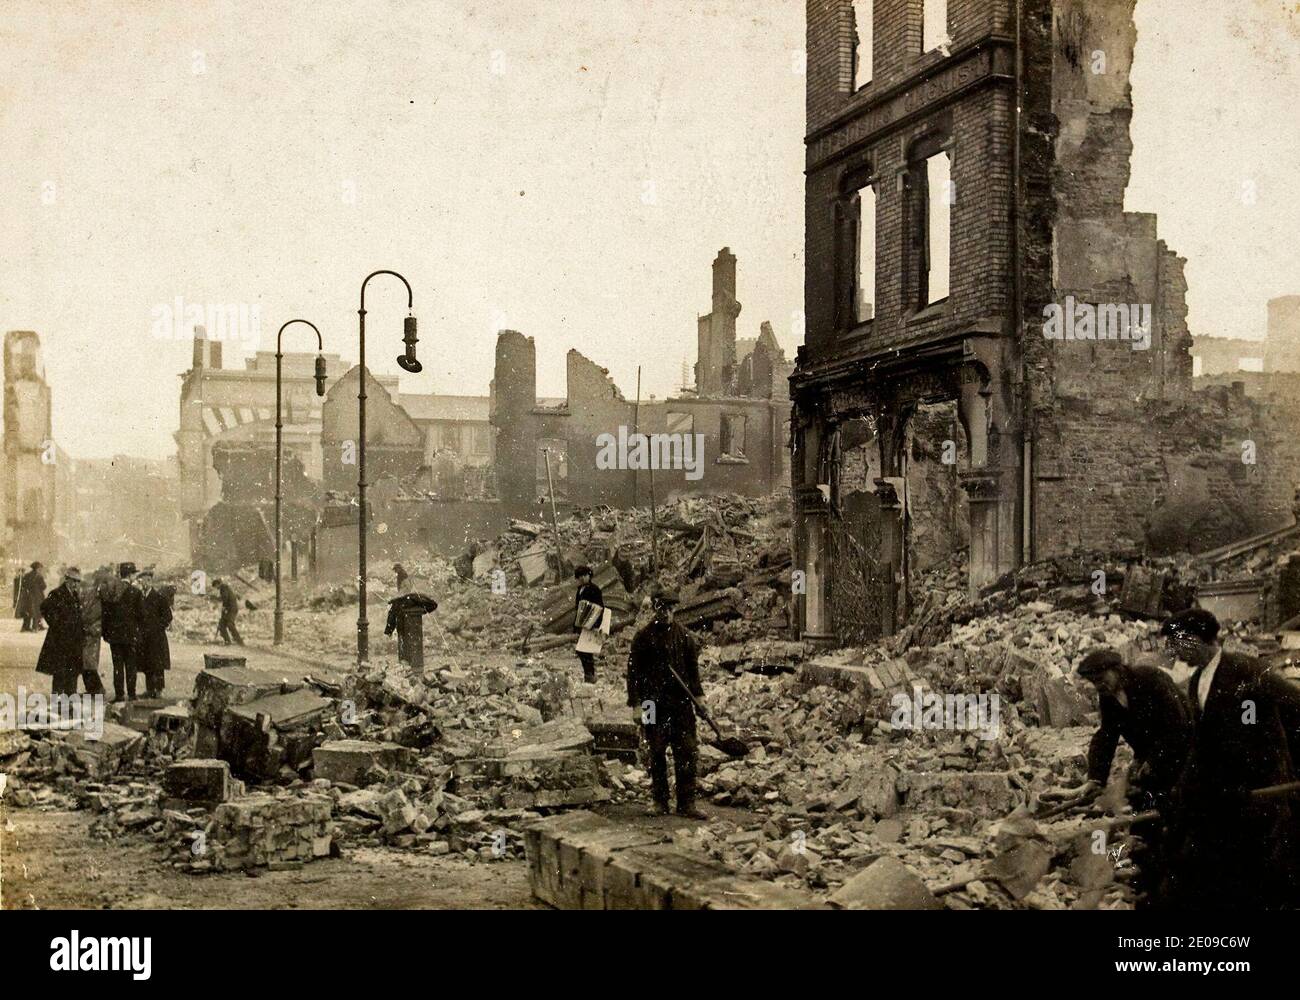 St Patrick's Street in Cork, Ireland on (or around) 14 December 1920. The image captures the aftermath of what's known as the Burning of Cork. This event occurred on 11-12 December 1920 during the Irish War of Independence. Stock Photo